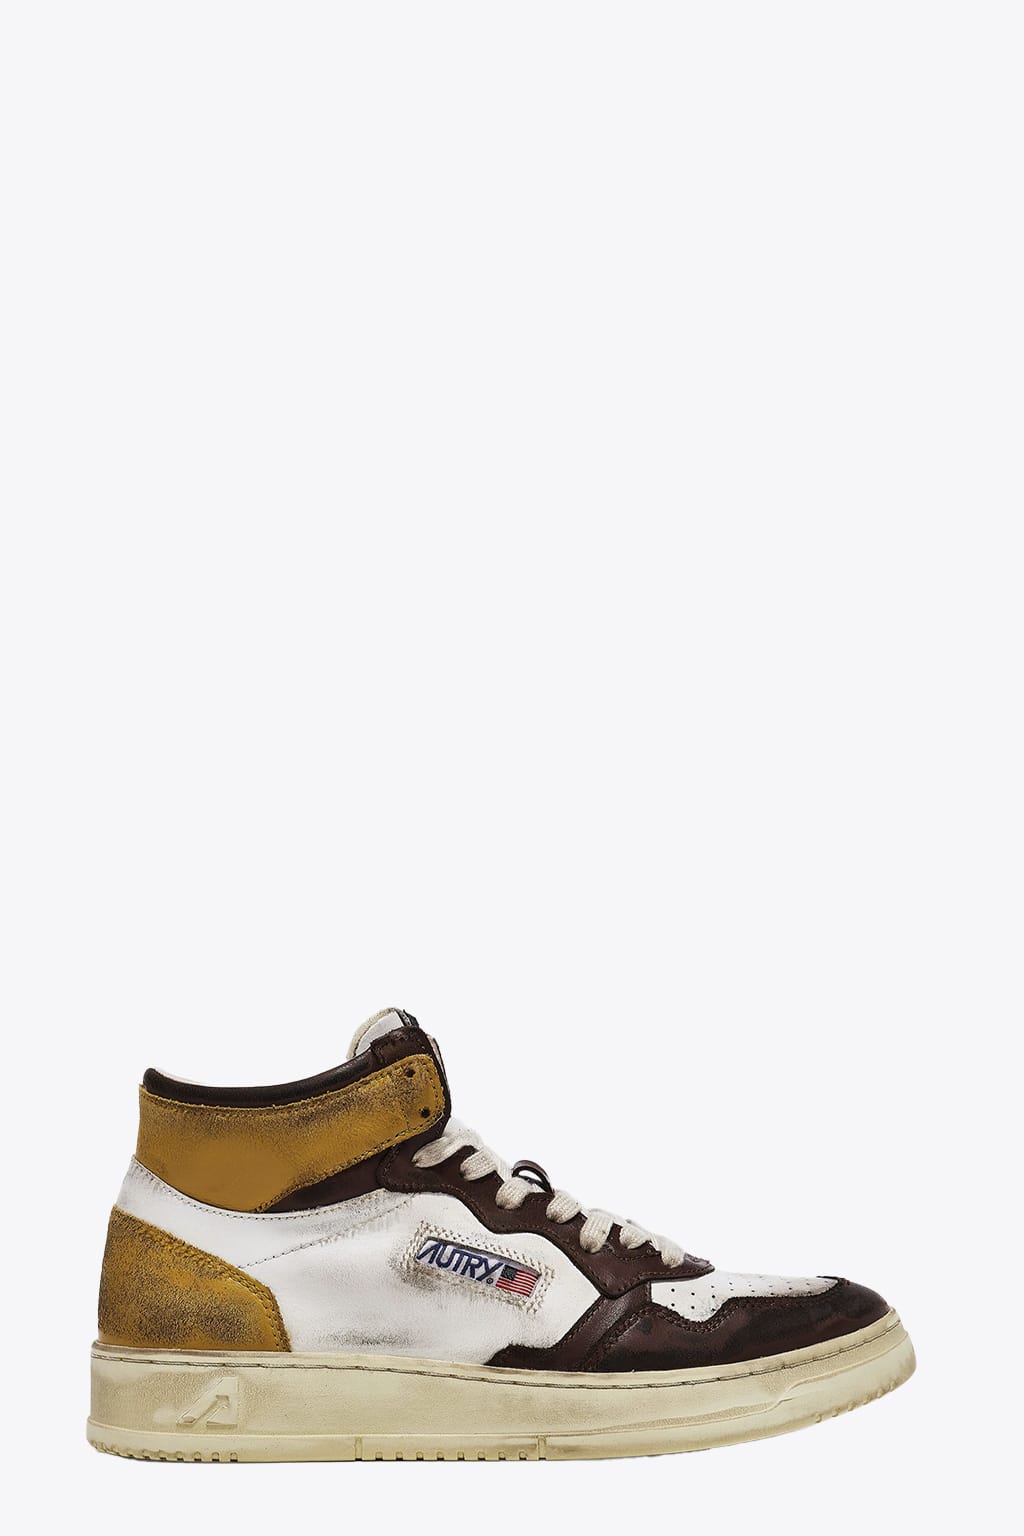 Autry Sup Vint Mid Man Leat Wht/brw/hon White/brown/honey yellow distressed leather mid sneaker.